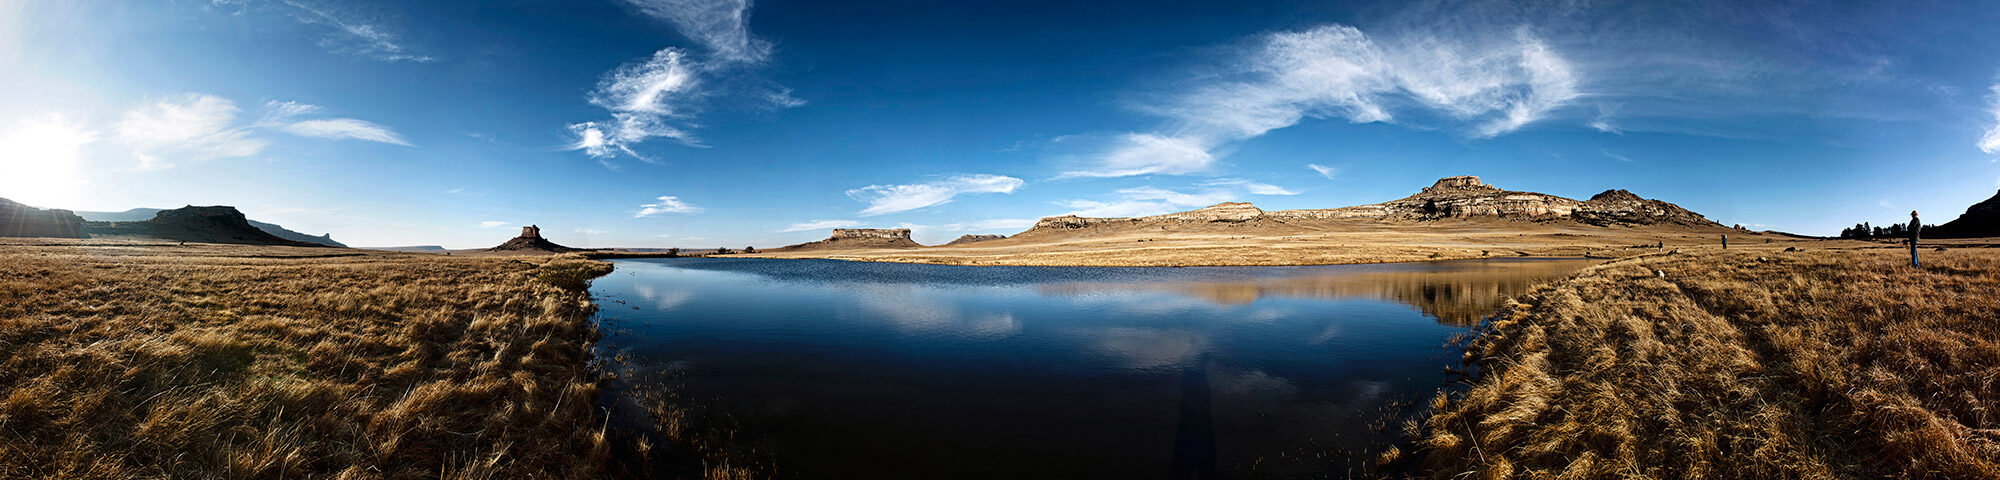 Lanscape view of Free State Nature Reserve dam and mountains in bakground